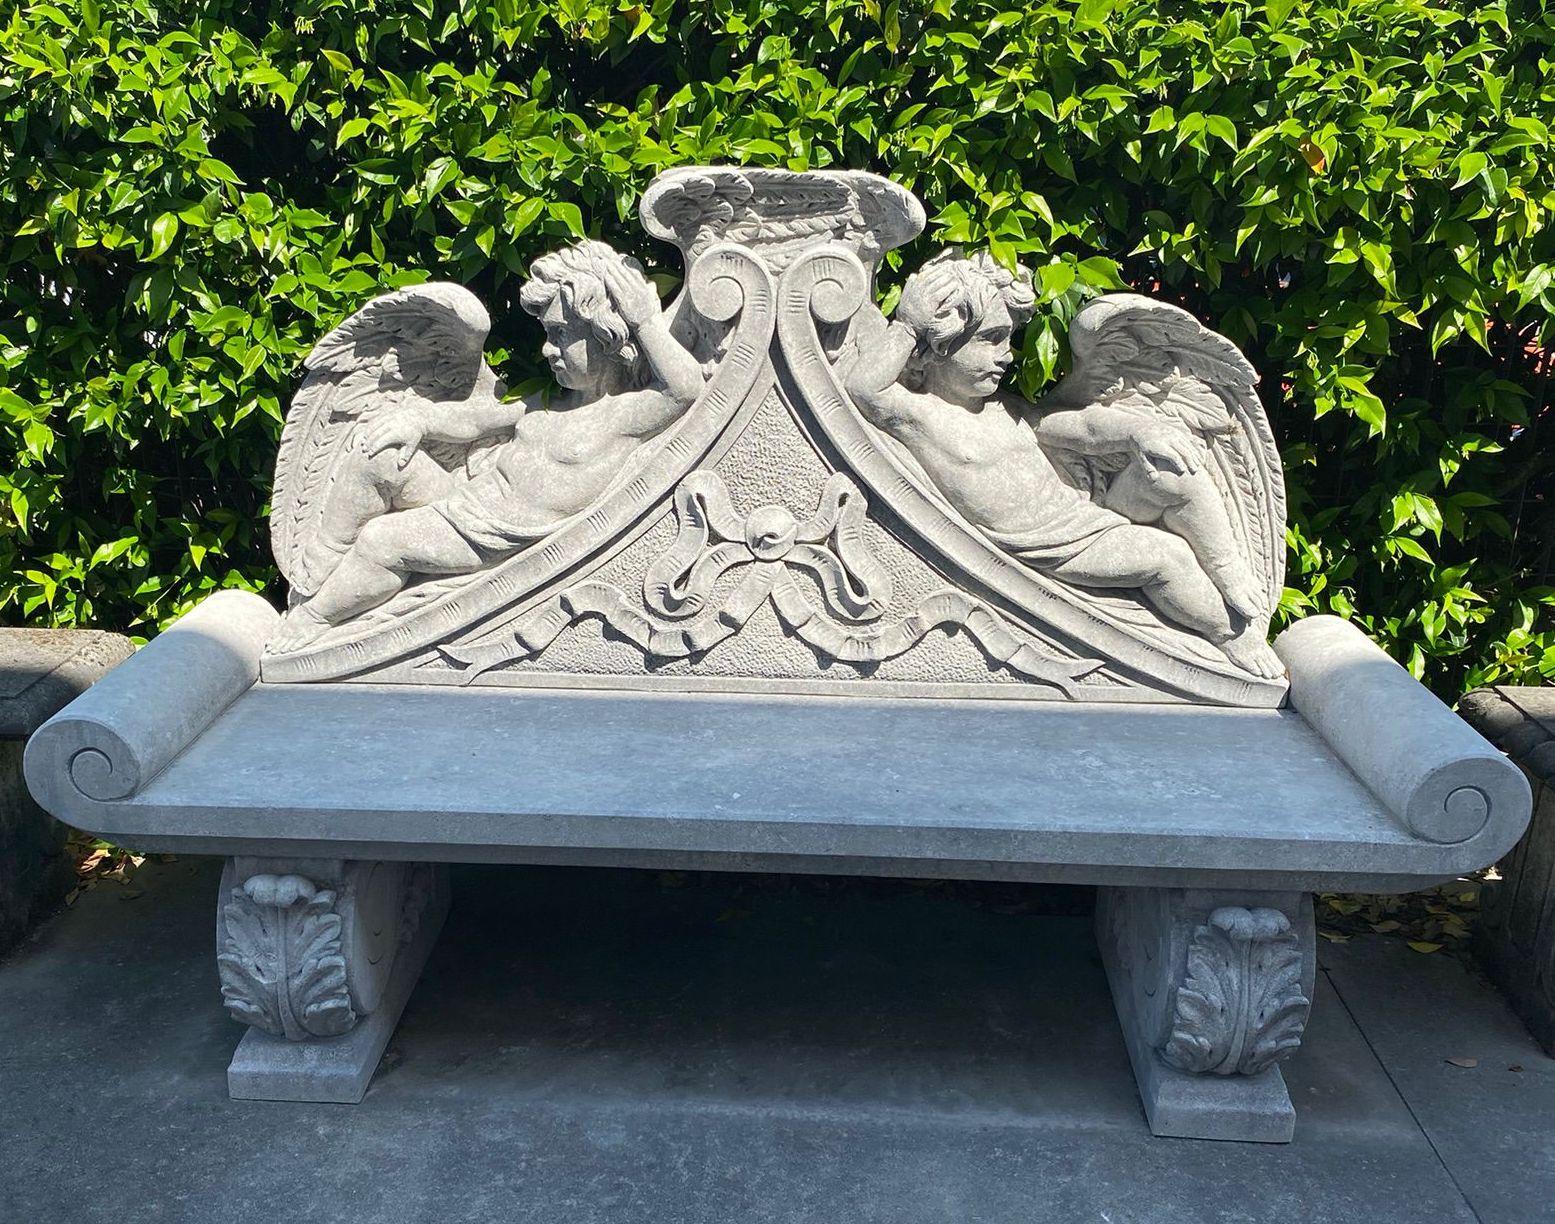 Outdoor Italian Finely Carved Large Lime Stone Bench Garden Furniture In Excellent Condition For Sale In Rome, IT